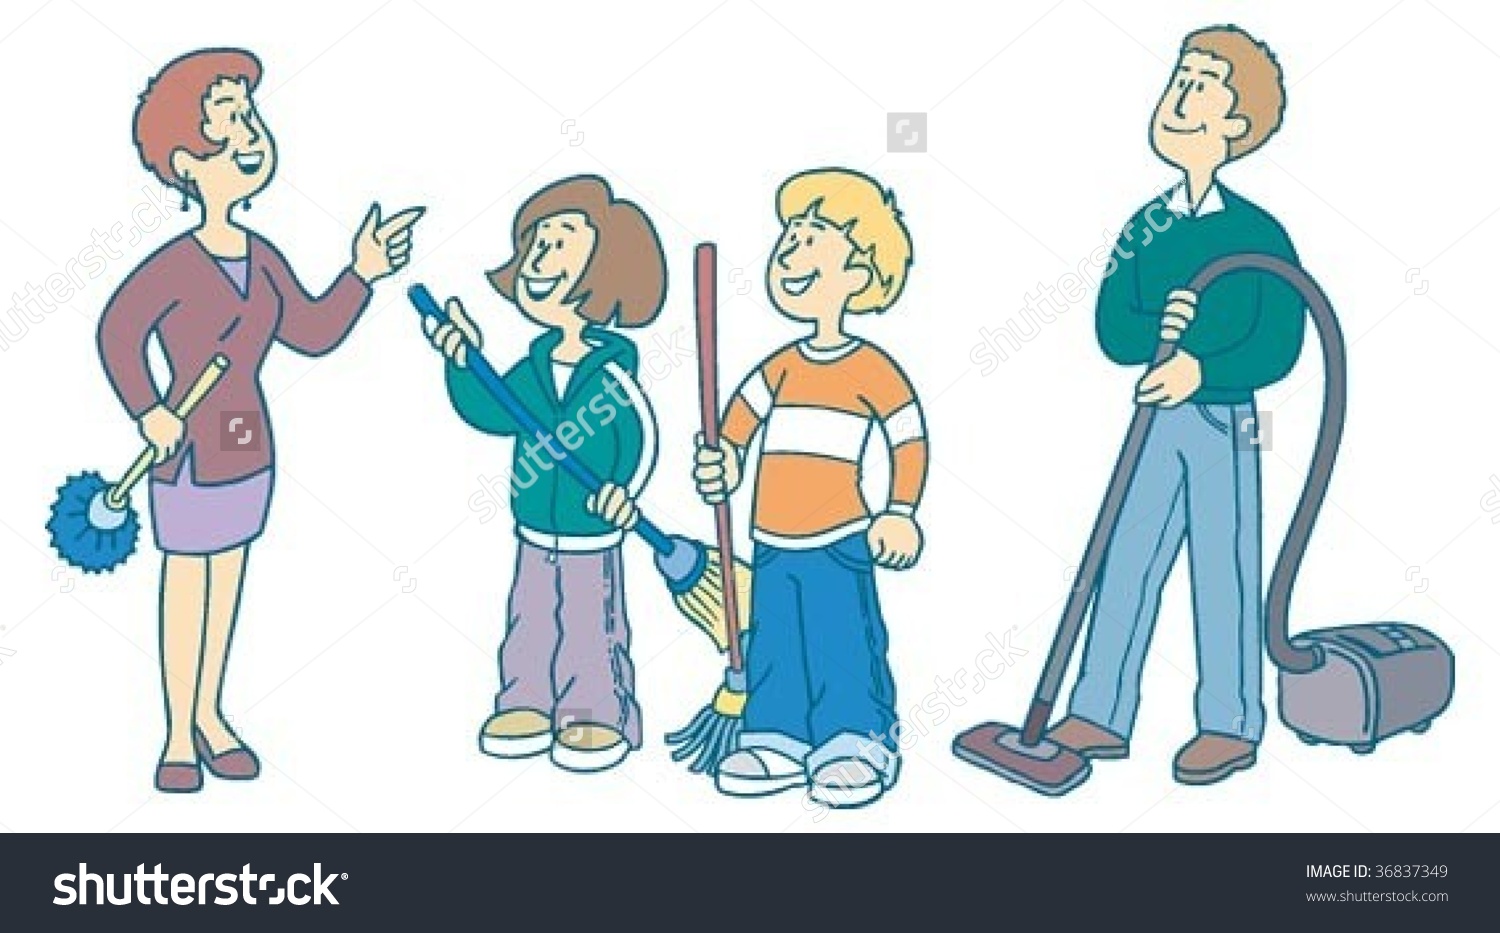 Family Cleaning Together Clipart (29+).